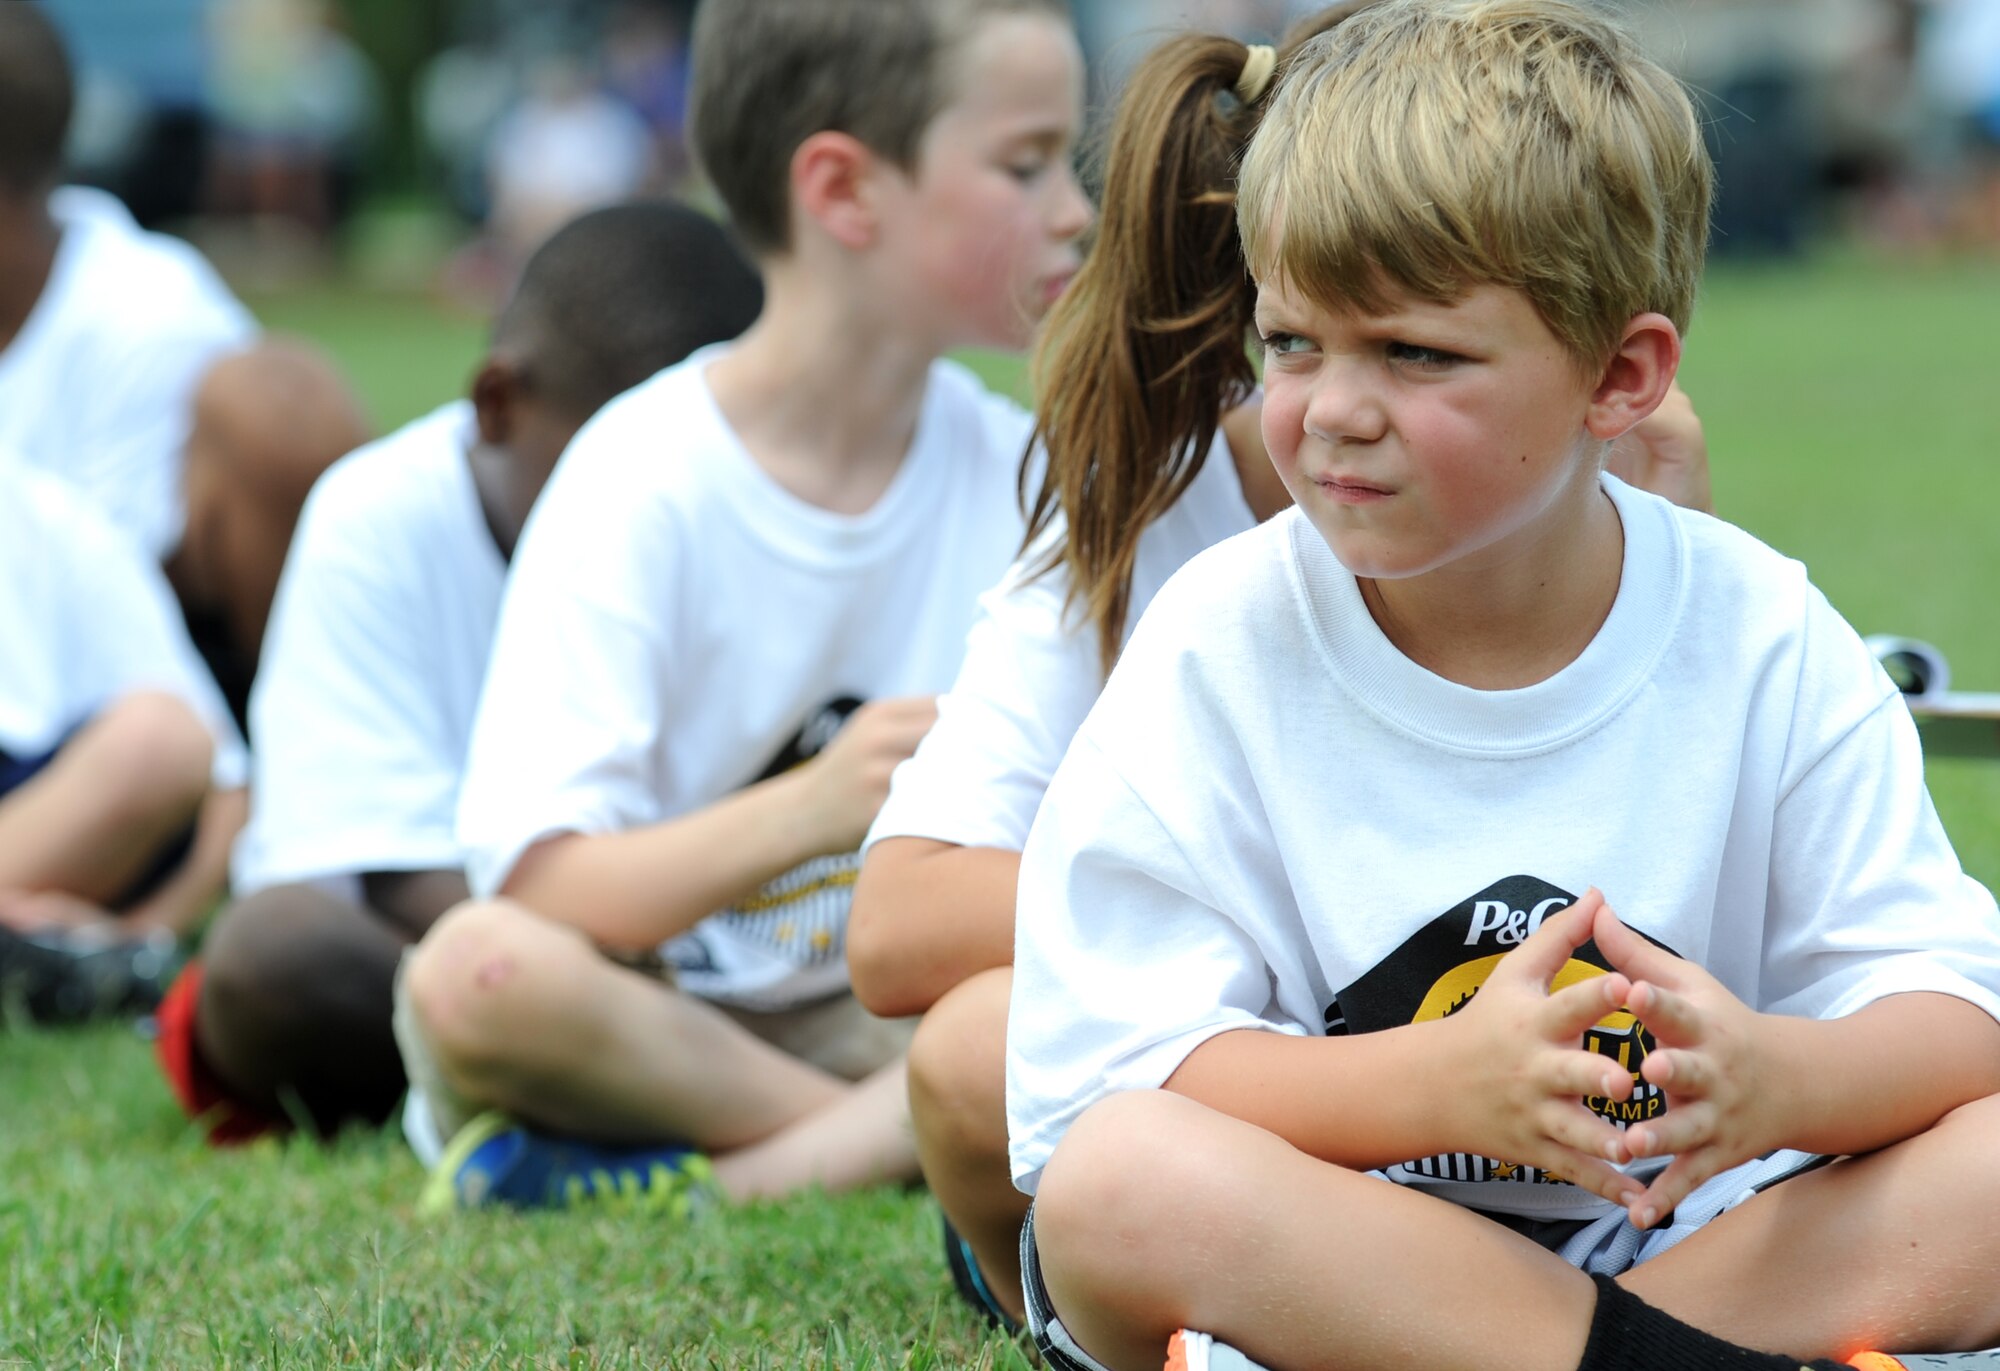 A National Football League ProCamp athlete puts on his game face, July 16, 2015, at Seymour Johnson Air Force Base, North Carolina. Children in grades one through eight spent two days cycling through drills and learning the value of teamwork and leadership. (U.S. Air Force photo/Senior Airman Ashley J. Thum)